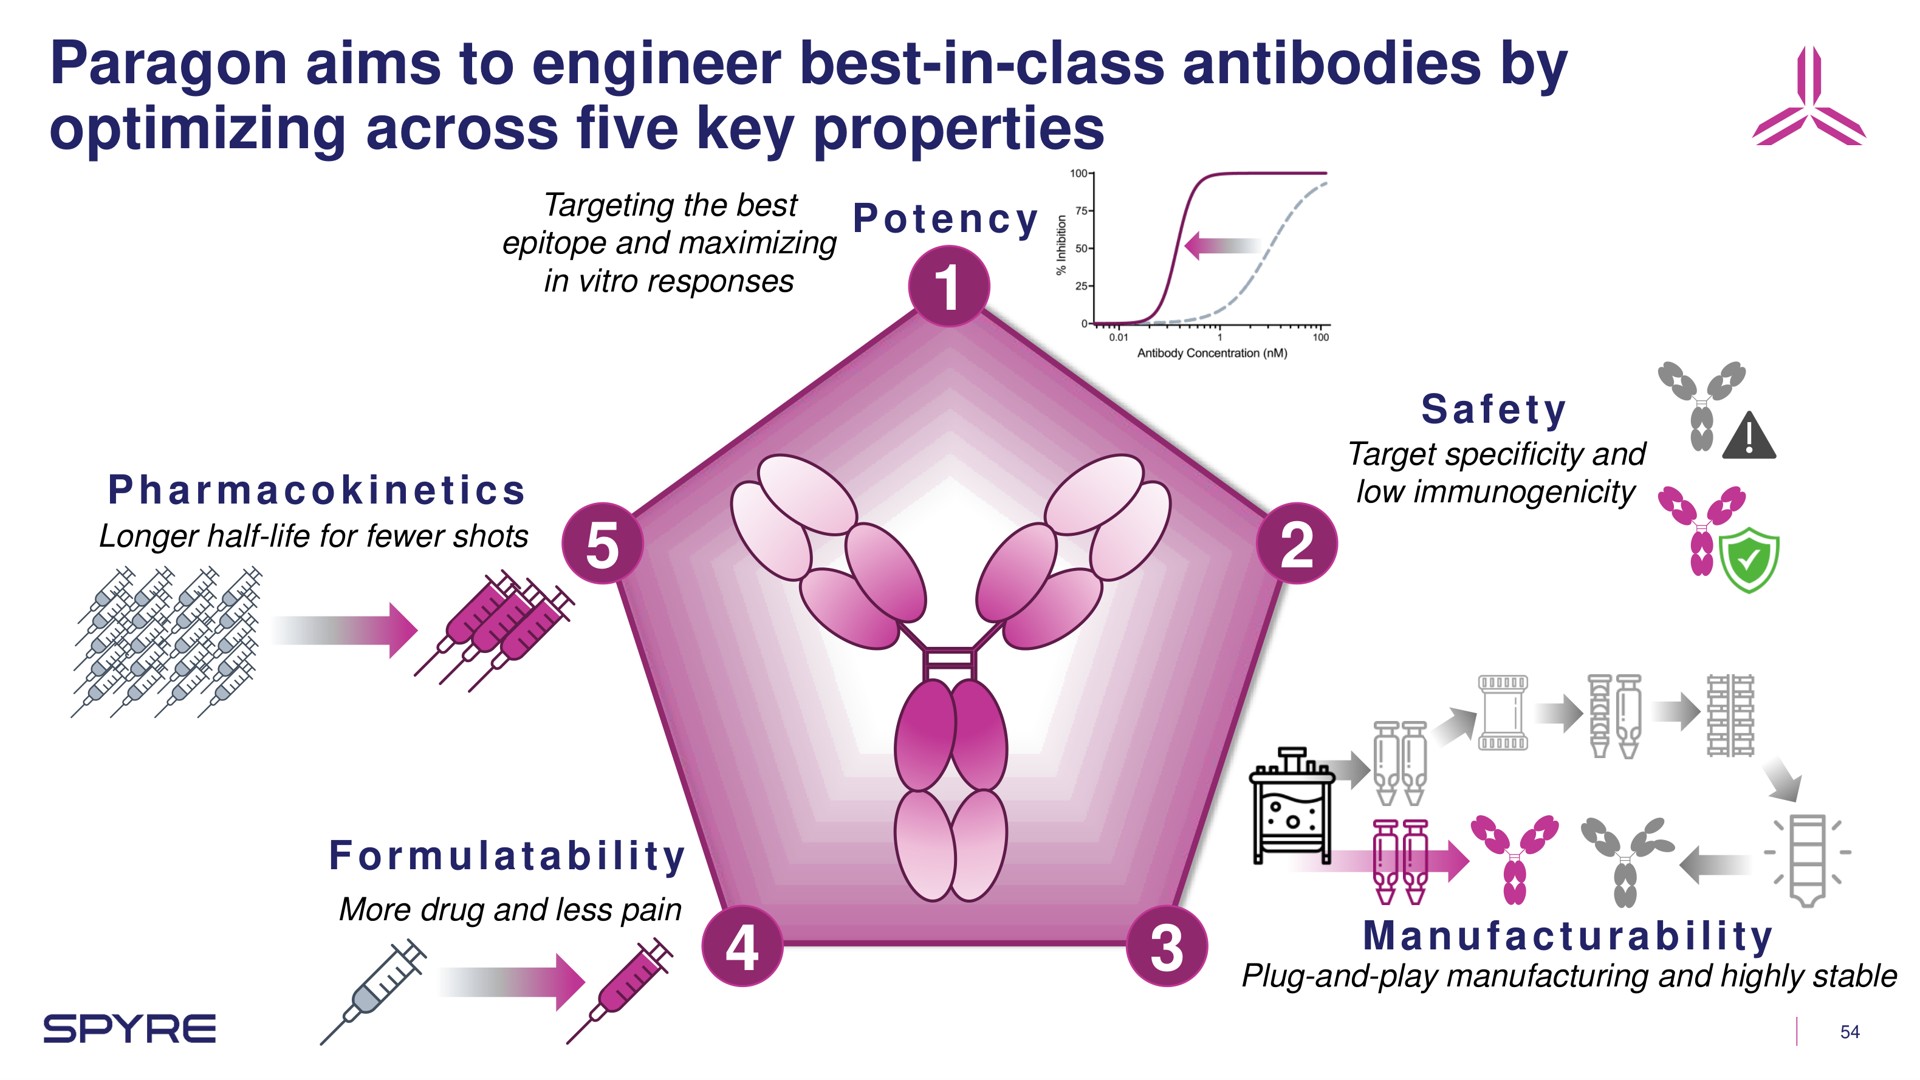 paragon aims to engineer best in class antibodies by optimizing across five key properties | Aeglea BioTherapeutics